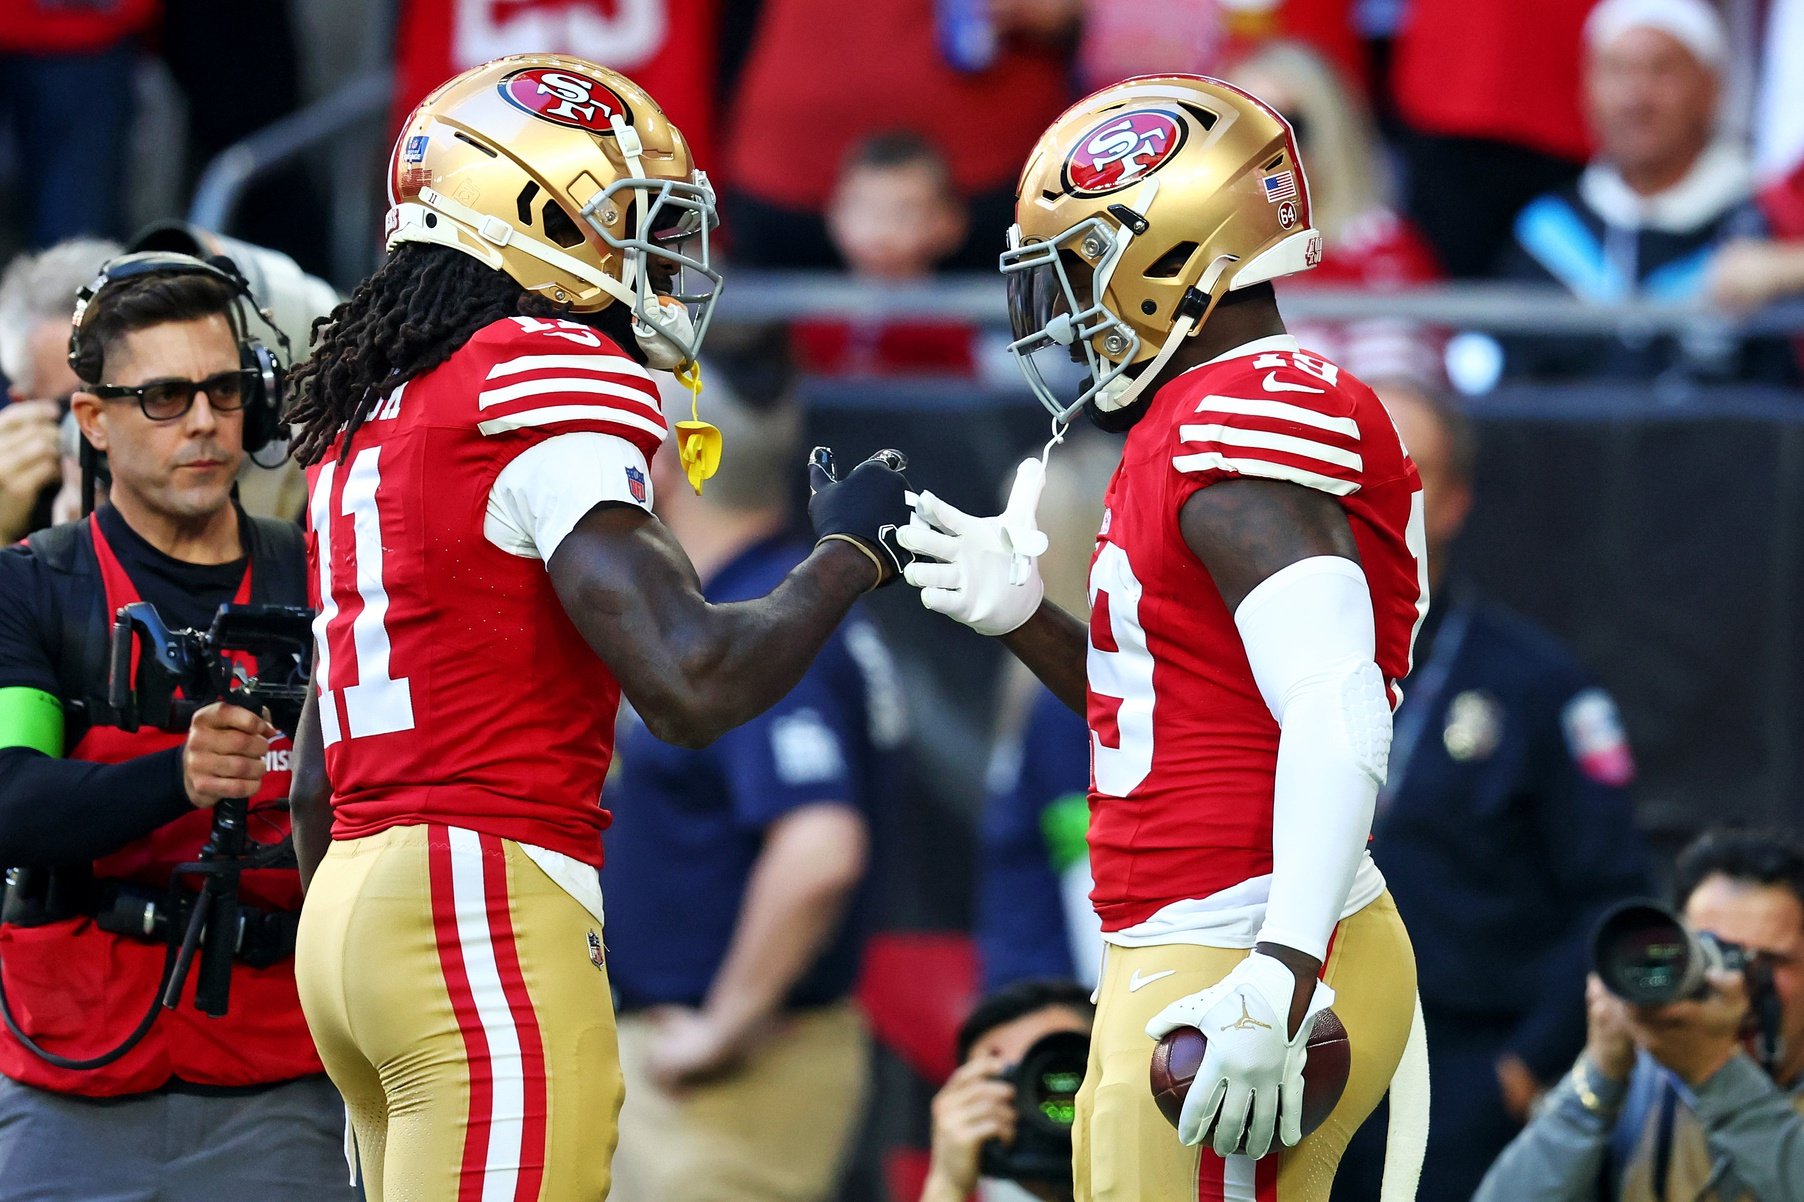 San Francisco 49ers wide receiver Deebo Samuel (19) celebrates with wide receiver Brandon Aiyuk (11) after scoring a touchdown during the first quarter against the Arizona Cardinals at State Farm Stadium.